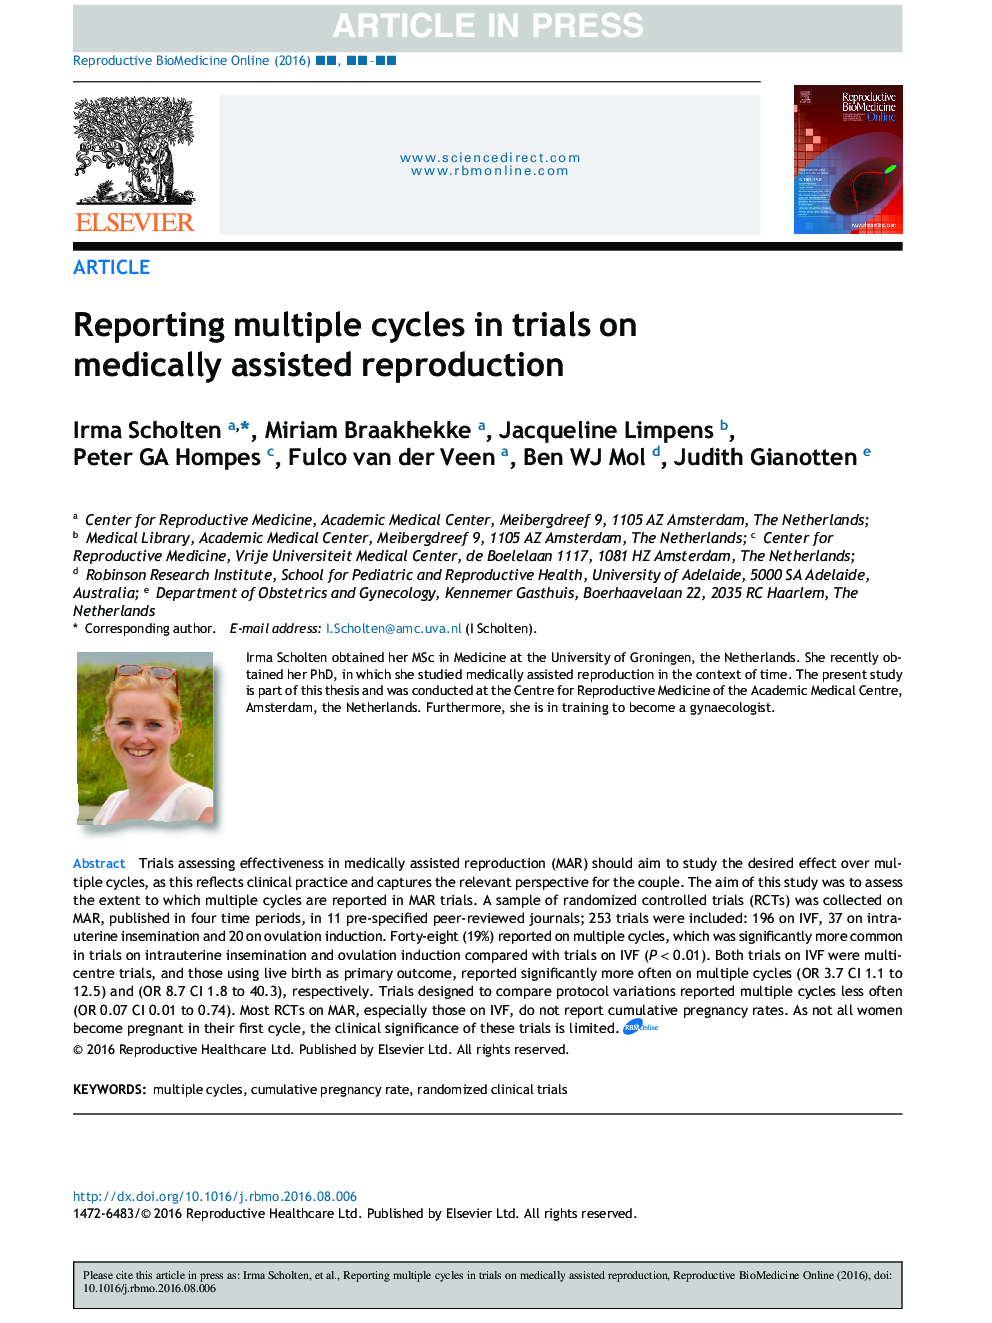 Reporting multiple cycles in trials on medically assisted reproduction